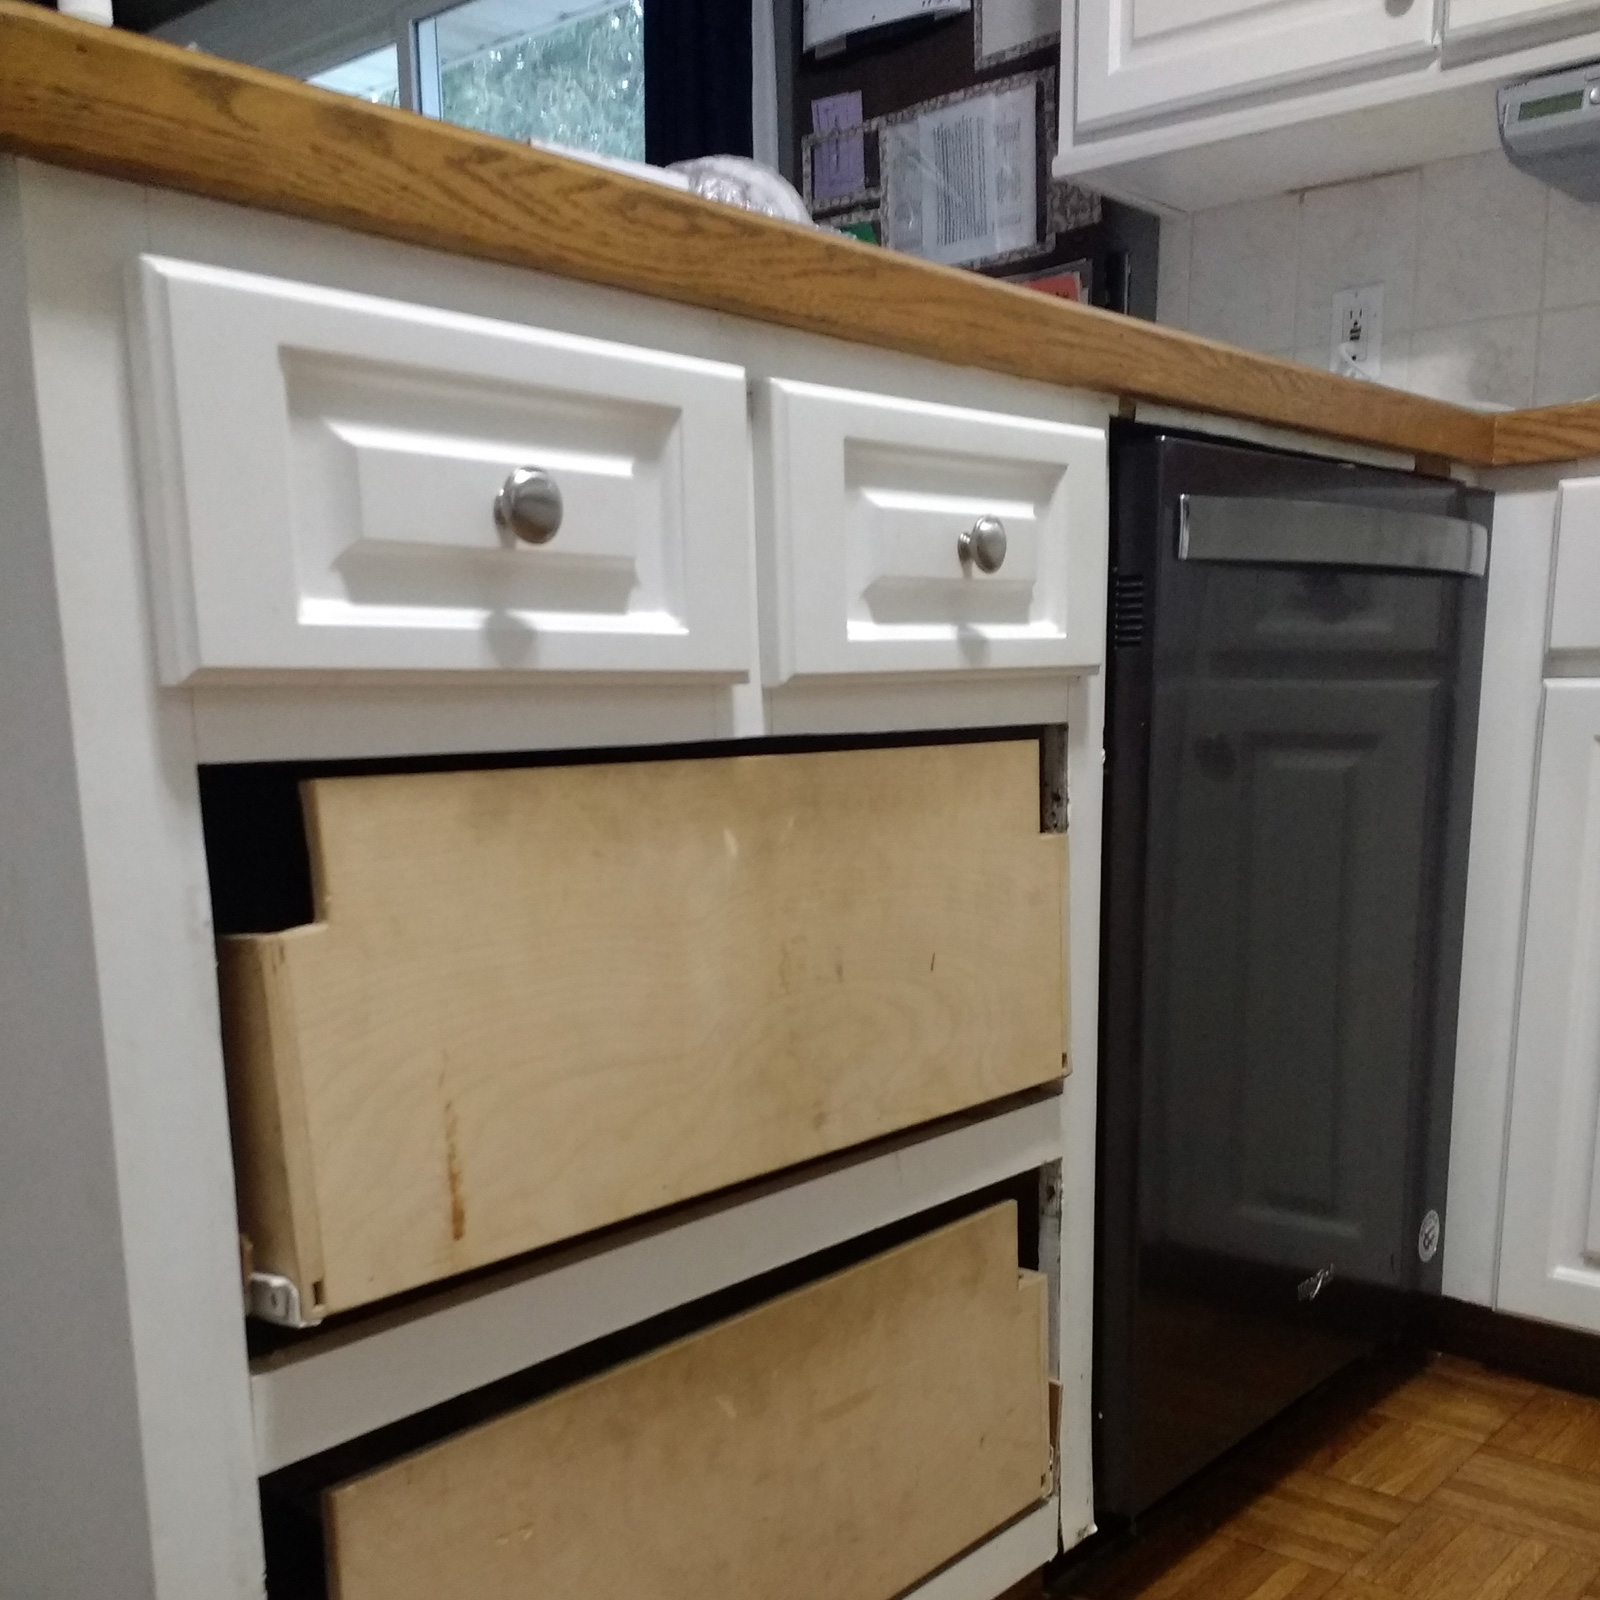 Entry 182 - Missing cabinetry makes for an unsightly kitchen